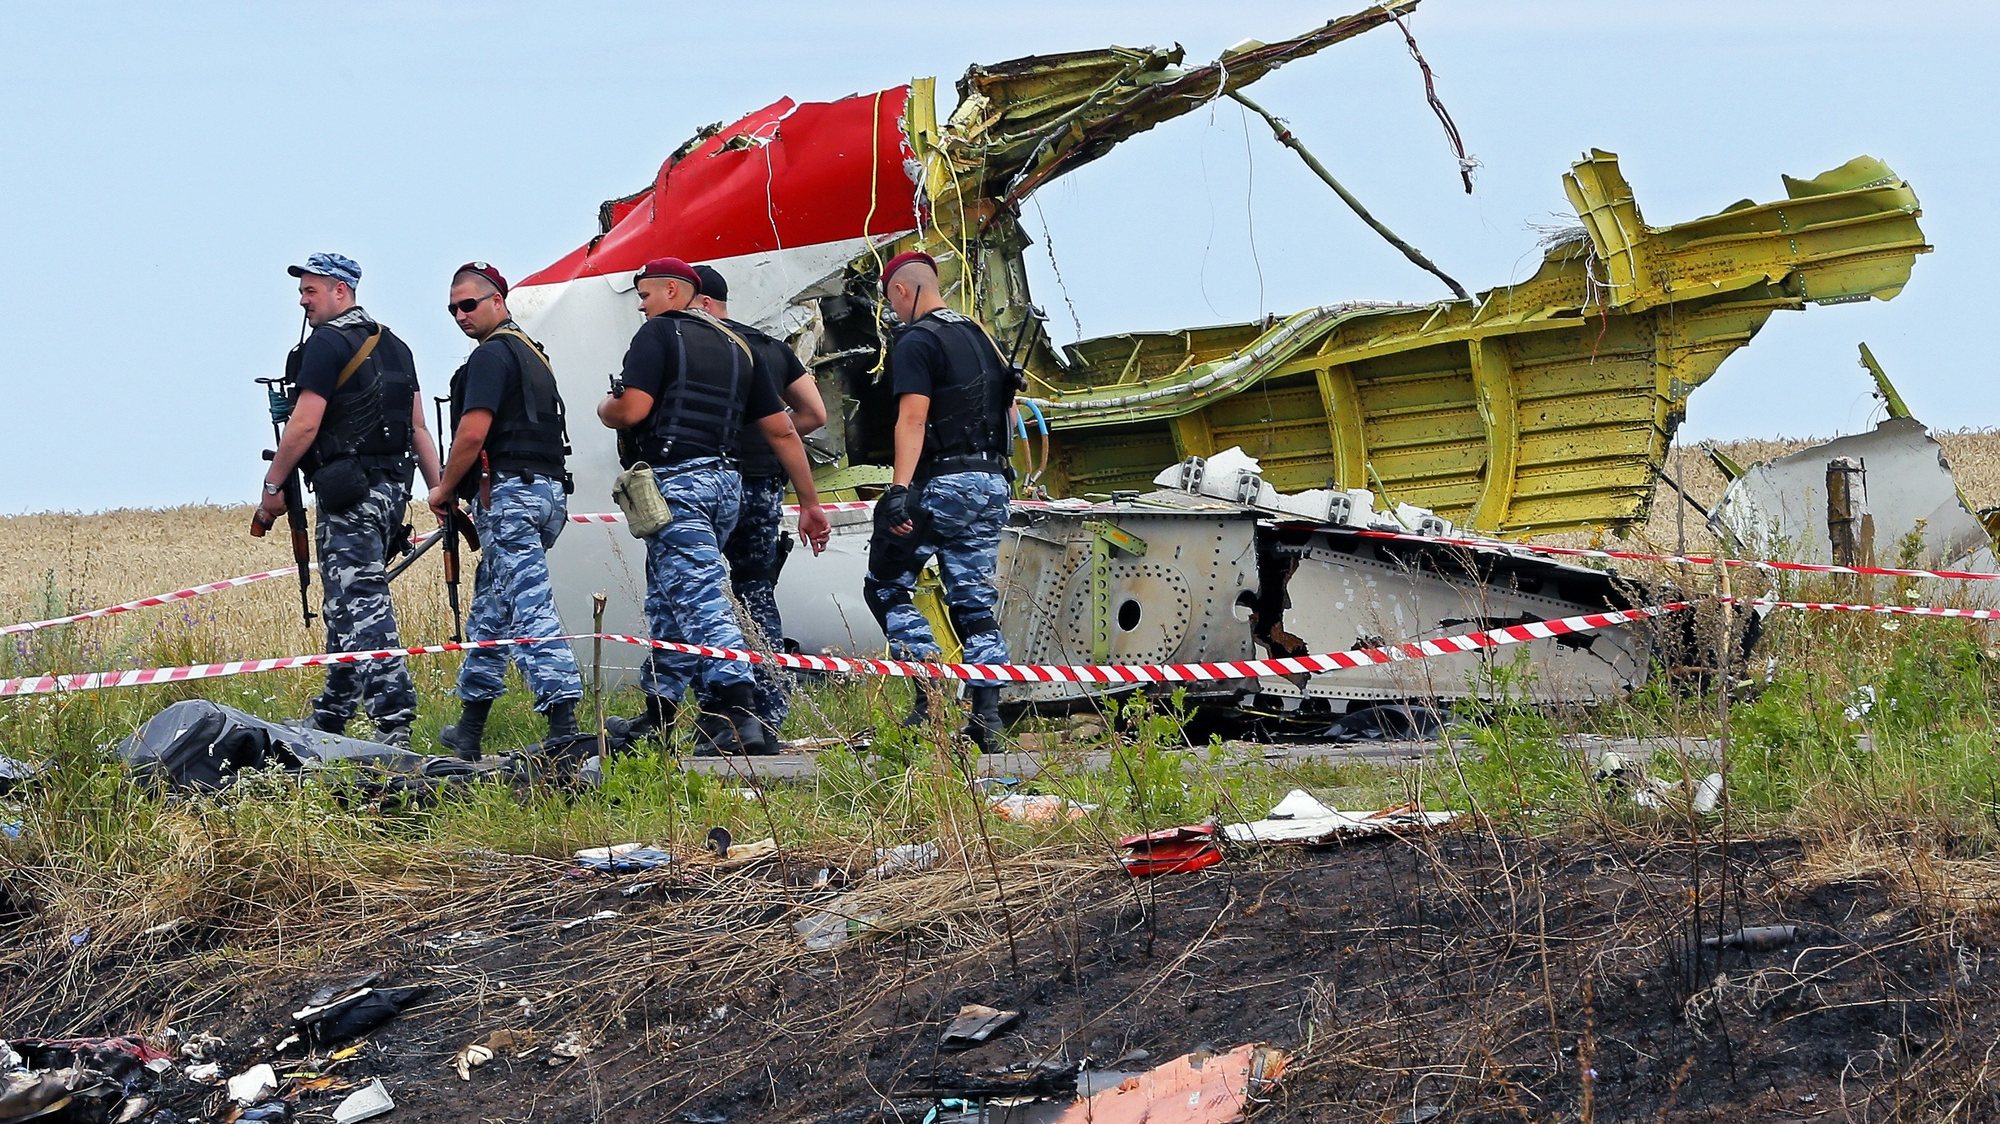 epa08255990  (FILE) - Armed rebel soldiers pass in front of a big piece of debris at the main crash site of the Boeing 777 Malaysia Airlines flight MH17, which crashed while flying over the eastern Ukraine region, near Grabovo, some 100 kilometers east from Donetsk, Ukraine, 19 July 2014. 
The District Court in The Hague on 09 March 2020 is due to start a trial against four people believed of being involved in the shooting down of a civil Boeing 777 plane over Ukraine on 17 July 2014. Dutch prosecutors charge three people with Russian citizenship and a Ukrainian national over the downing of Malaysia Airlines Flight MH17 from Amsterdam to Kuala Lumpur in which 283 passengers and 15 crew members on board were killed. Most of the victims were Dutch, Malaysian and Australian nationals. A Joint Investigation Team (JIT) from Belgium, Ukraine, Australia and Malaysia in their report came to the conclusion that a Russian-made BUK missile that hit the plane was fired from territory controlled by pro-Russian rebels. Russia has denied any responsibility for the downing and blamed Ukraine for the tragedy. It is not expected that the four accused will attend the trial as Russian law would prohibit their extradition.  EPA/ROBERT GHEMENT *** Local Caption *** 51488376